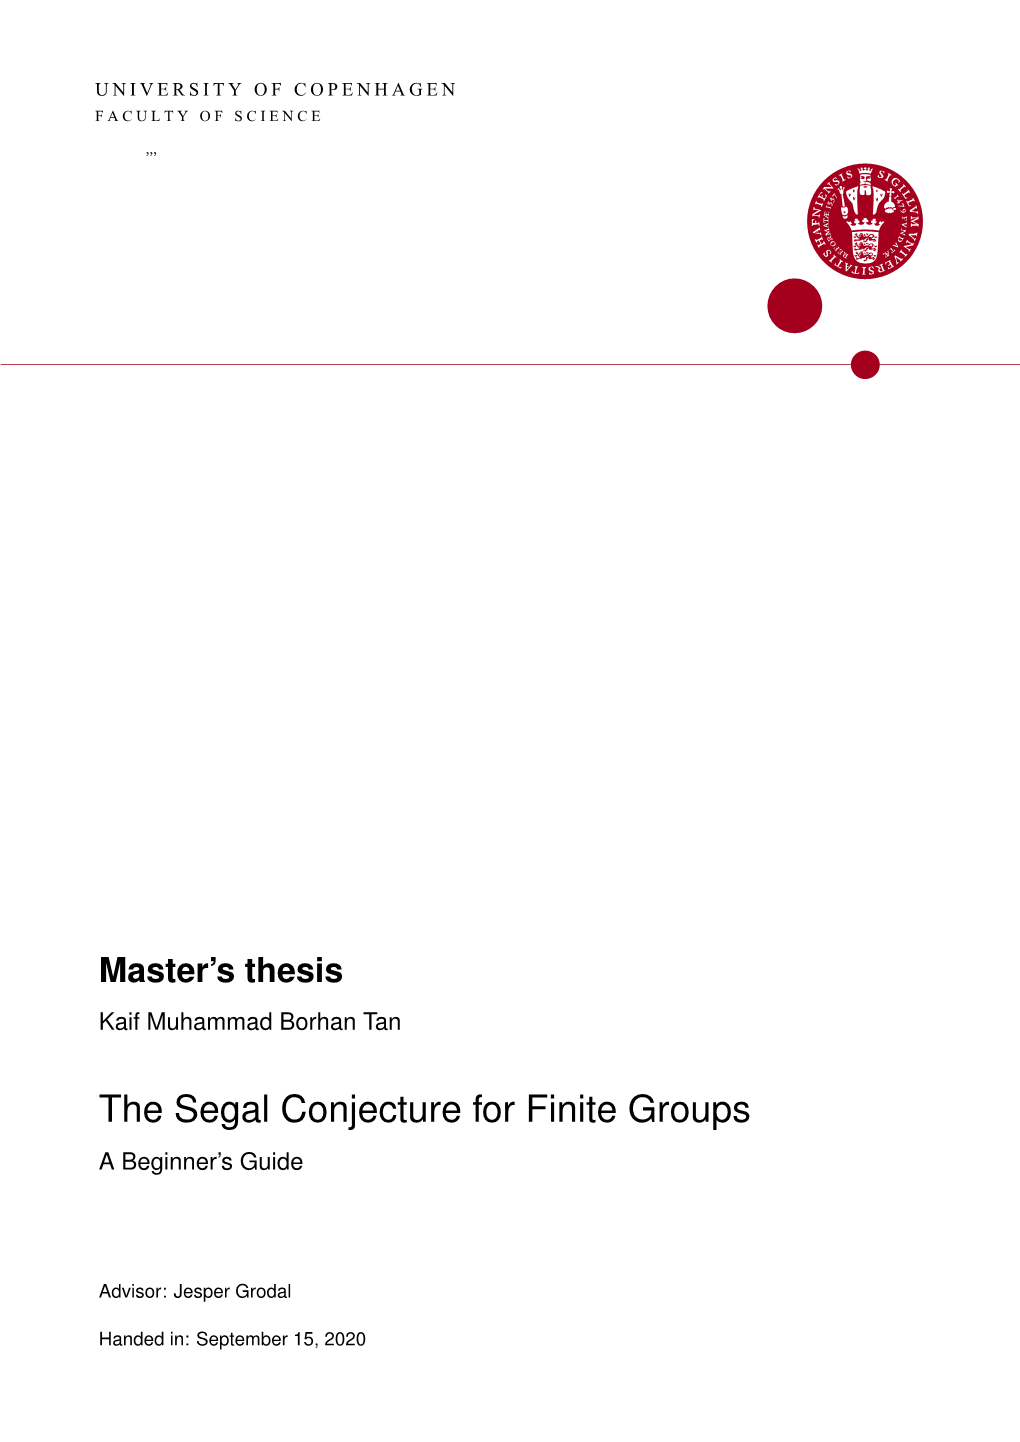 The Segal Conjecture for Finite Groups a Beginner’S Guide